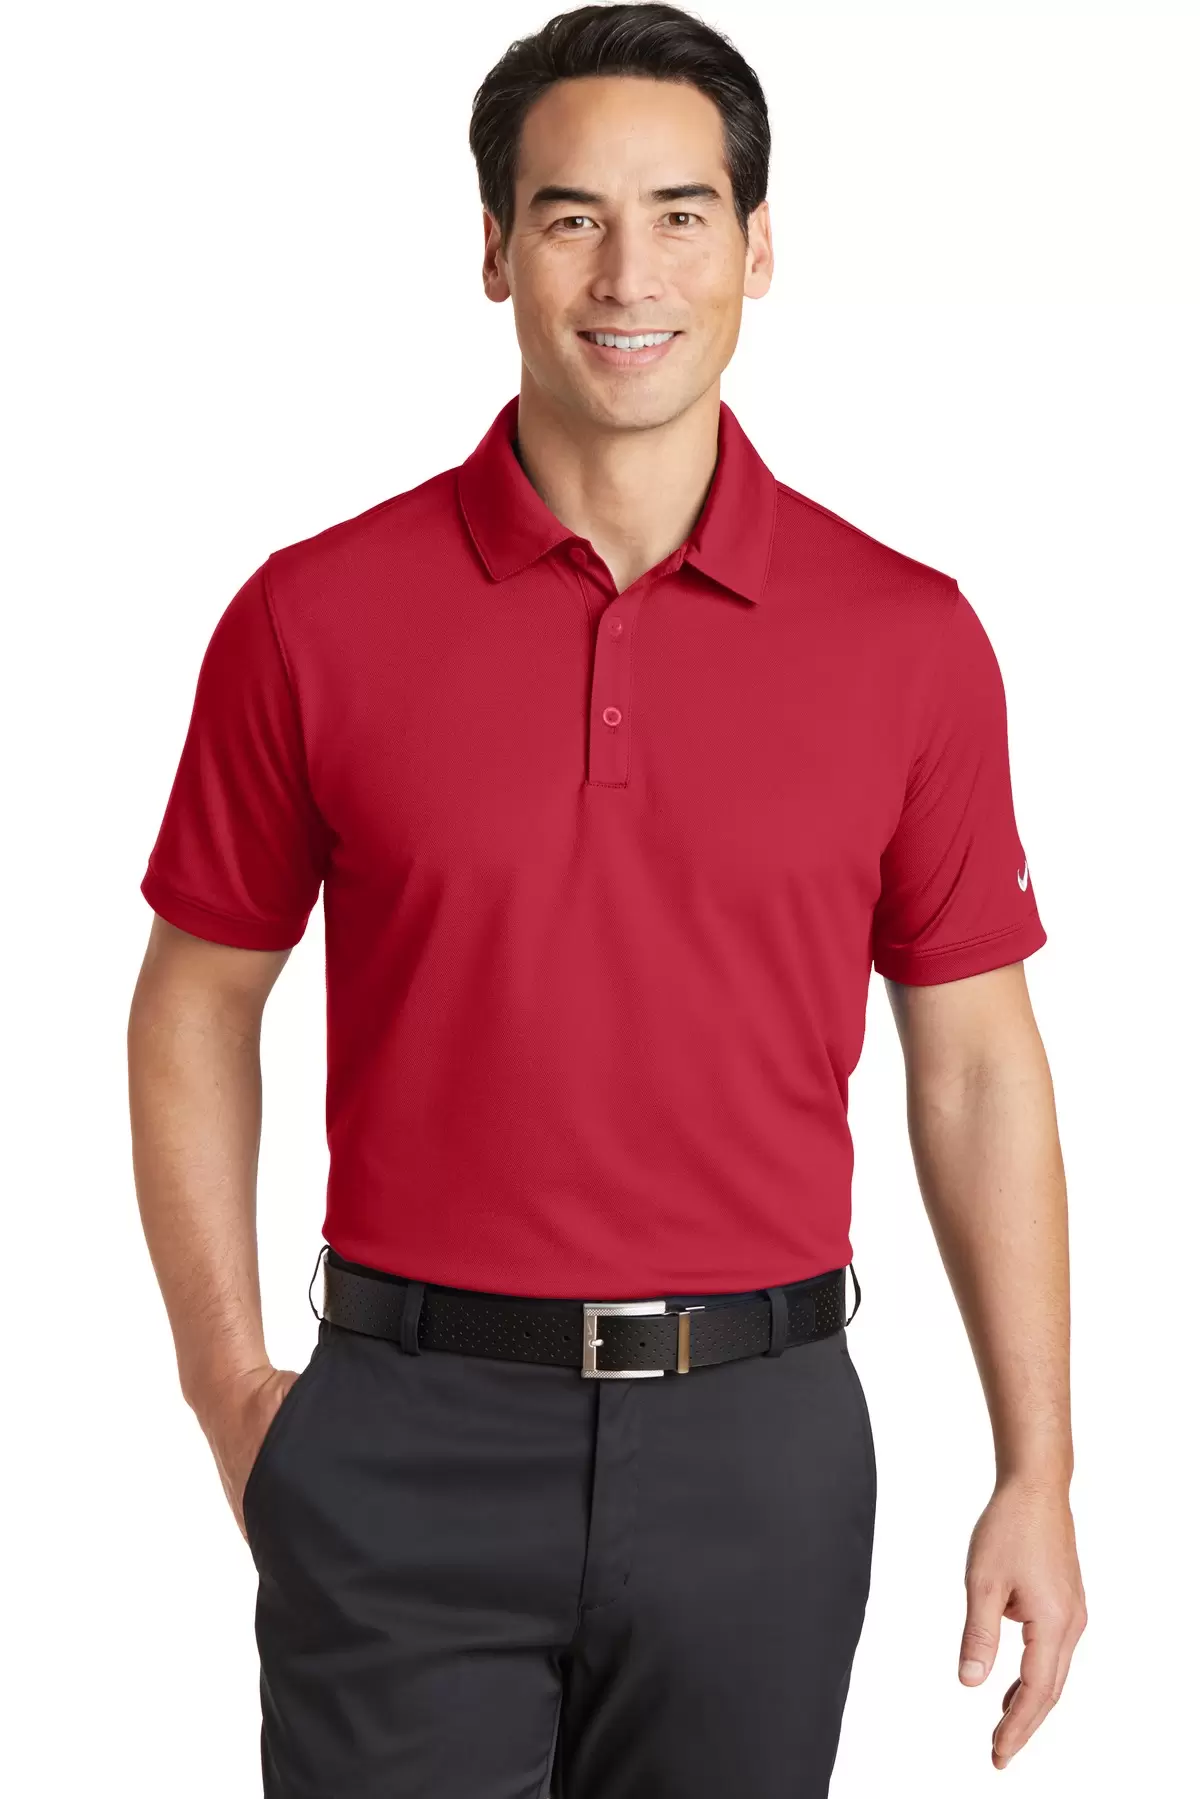 Nike Golf 746099 Dri-FIT Solid Icon Pique Modern Fit Polo Gym Red